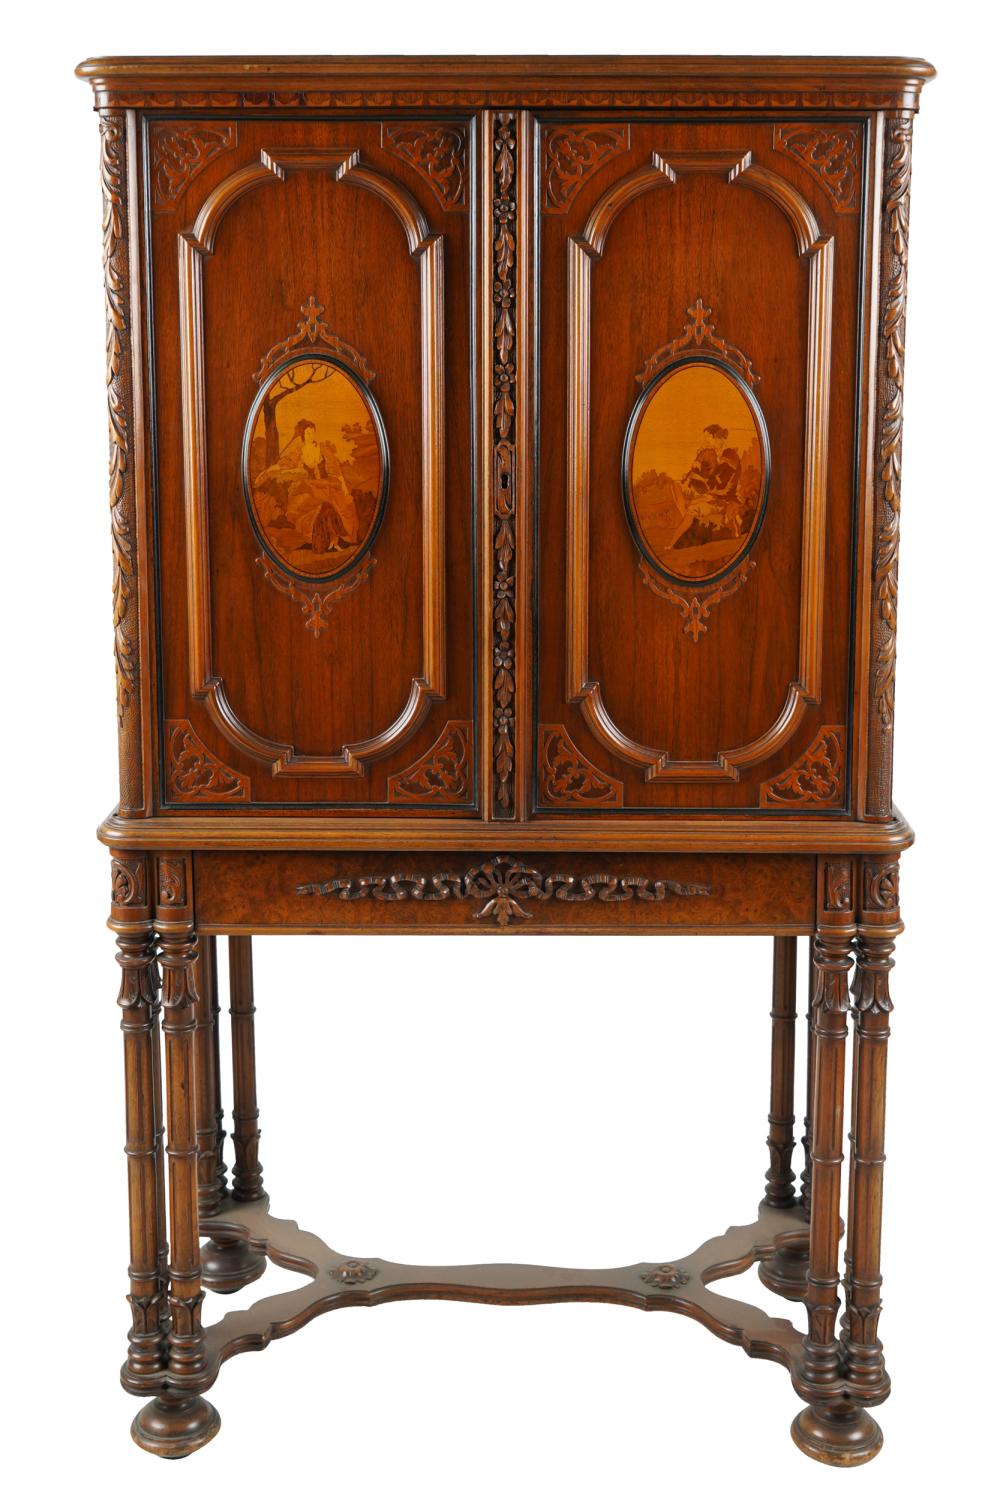 CARVED WALNUT MARQUETRY CABINET 332545